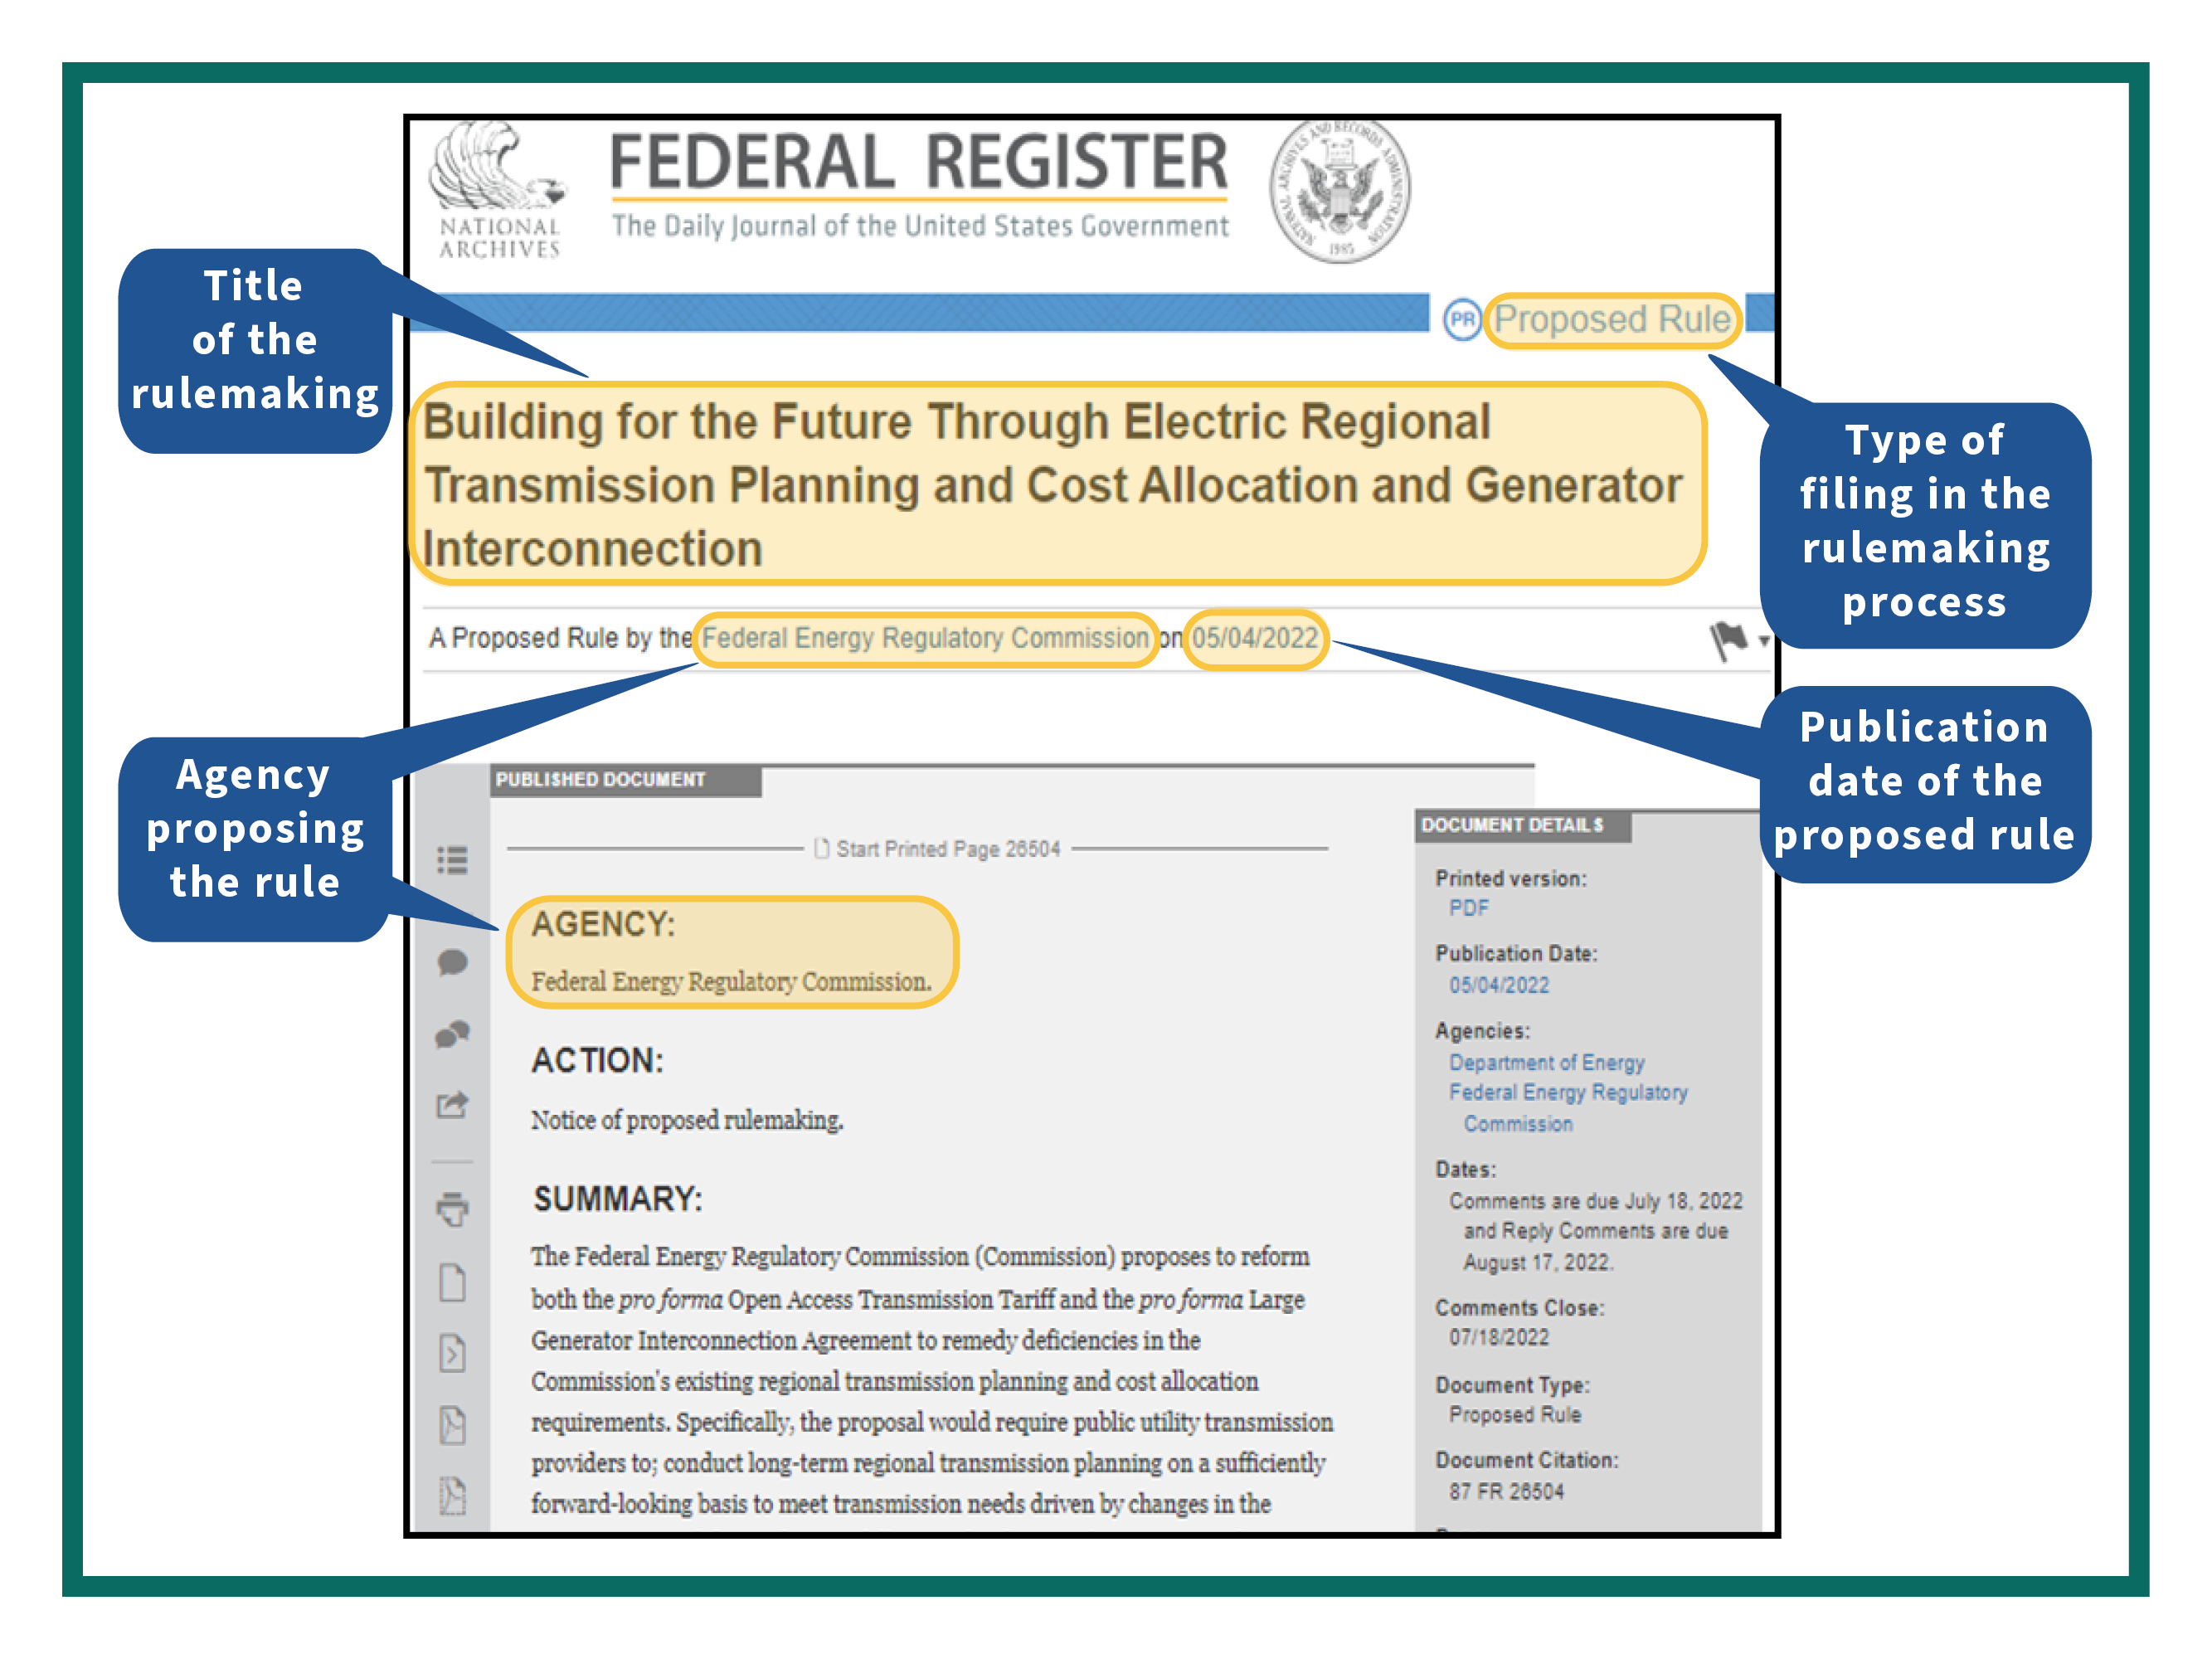 A screenshot of an NOPR publication in the Federal Register. Four key elements of the publication are highlighted and defined:  1. Type of filing in the rulemaking process; 2. Title of the rulemaking; 3. Agency proposing the rule; 4. Publication date of the proposed rule.